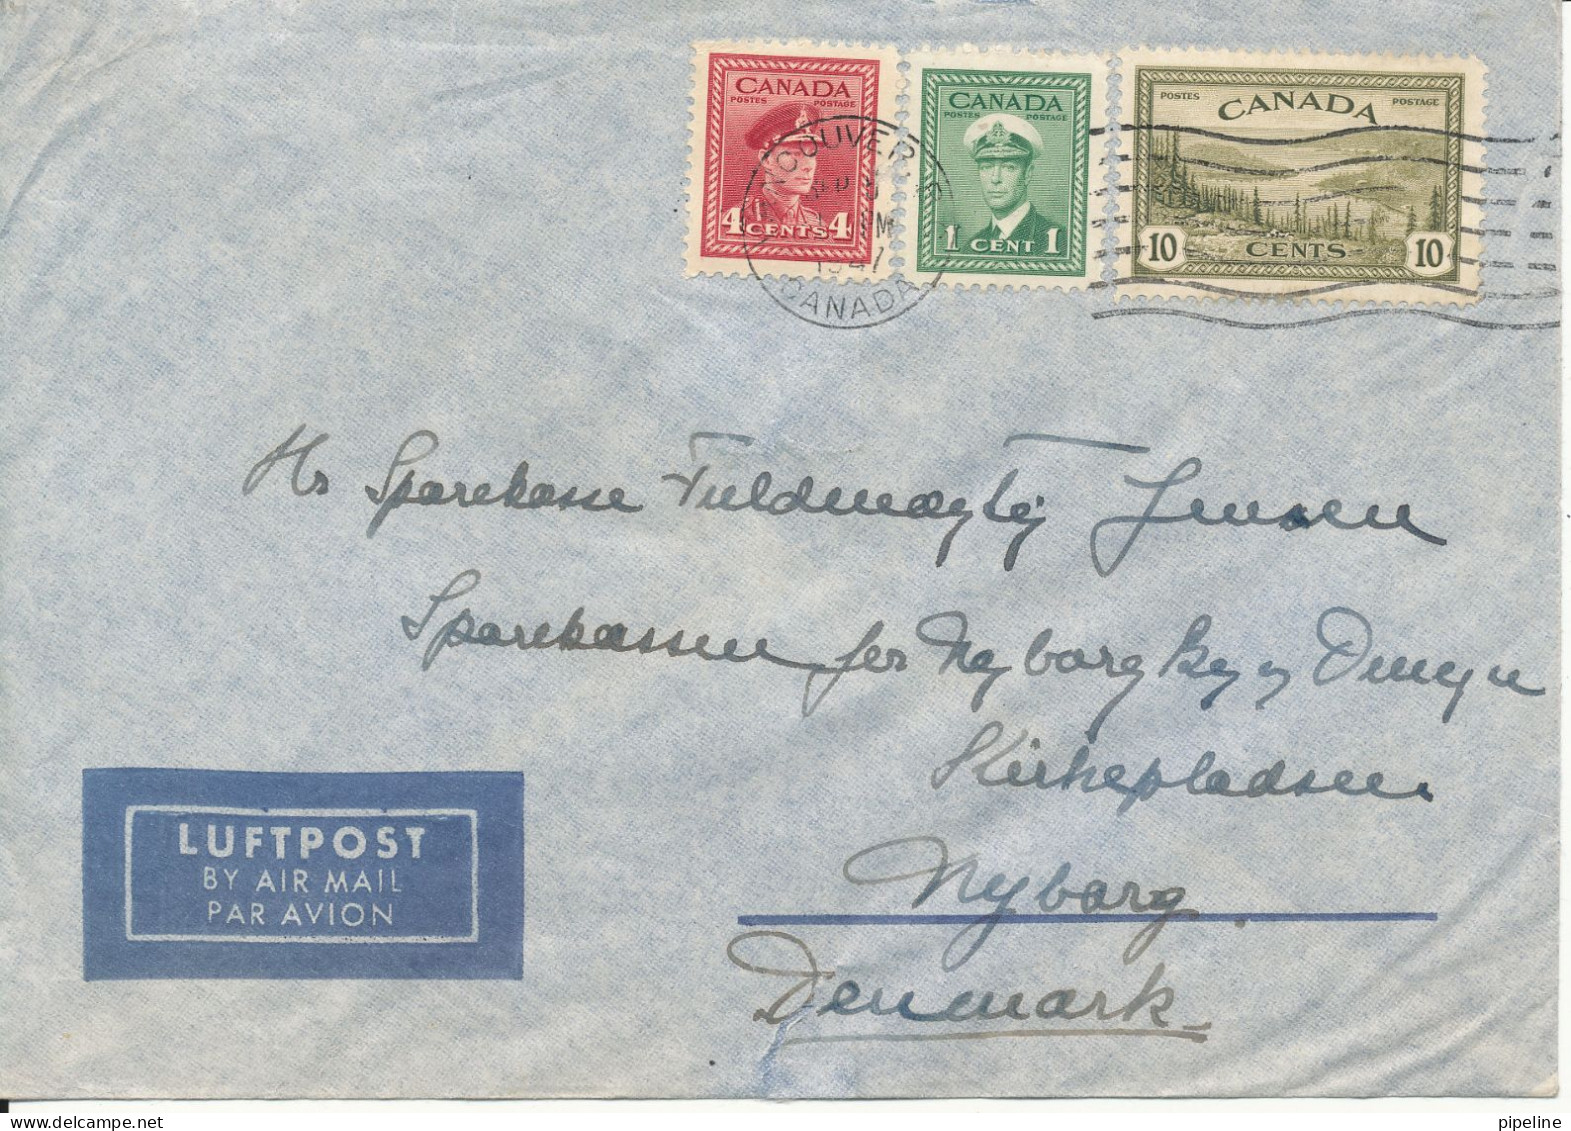 Canada Air Mail Cover Sent To Denmark - Luftpost